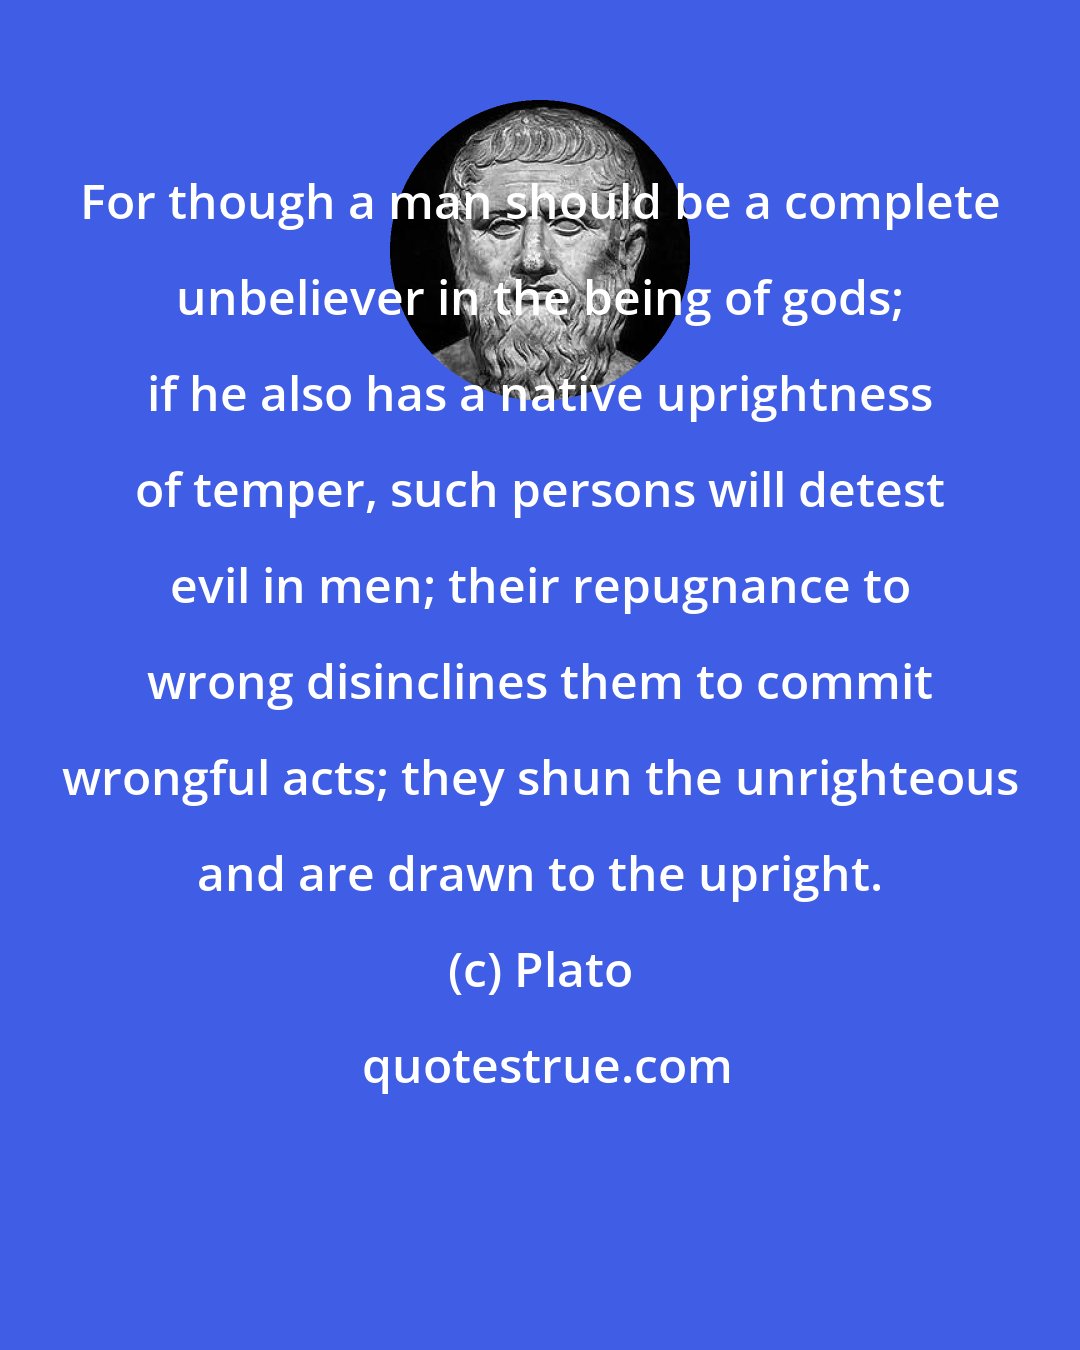 Plato: For though a man should be a complete unbeliever in the being of gods; if he also has a native uprightness of temper, such persons will detest evil in men; their repugnance to wrong disinclines them to commit wrongful acts; they shun the unrighteous and are drawn to the upright.